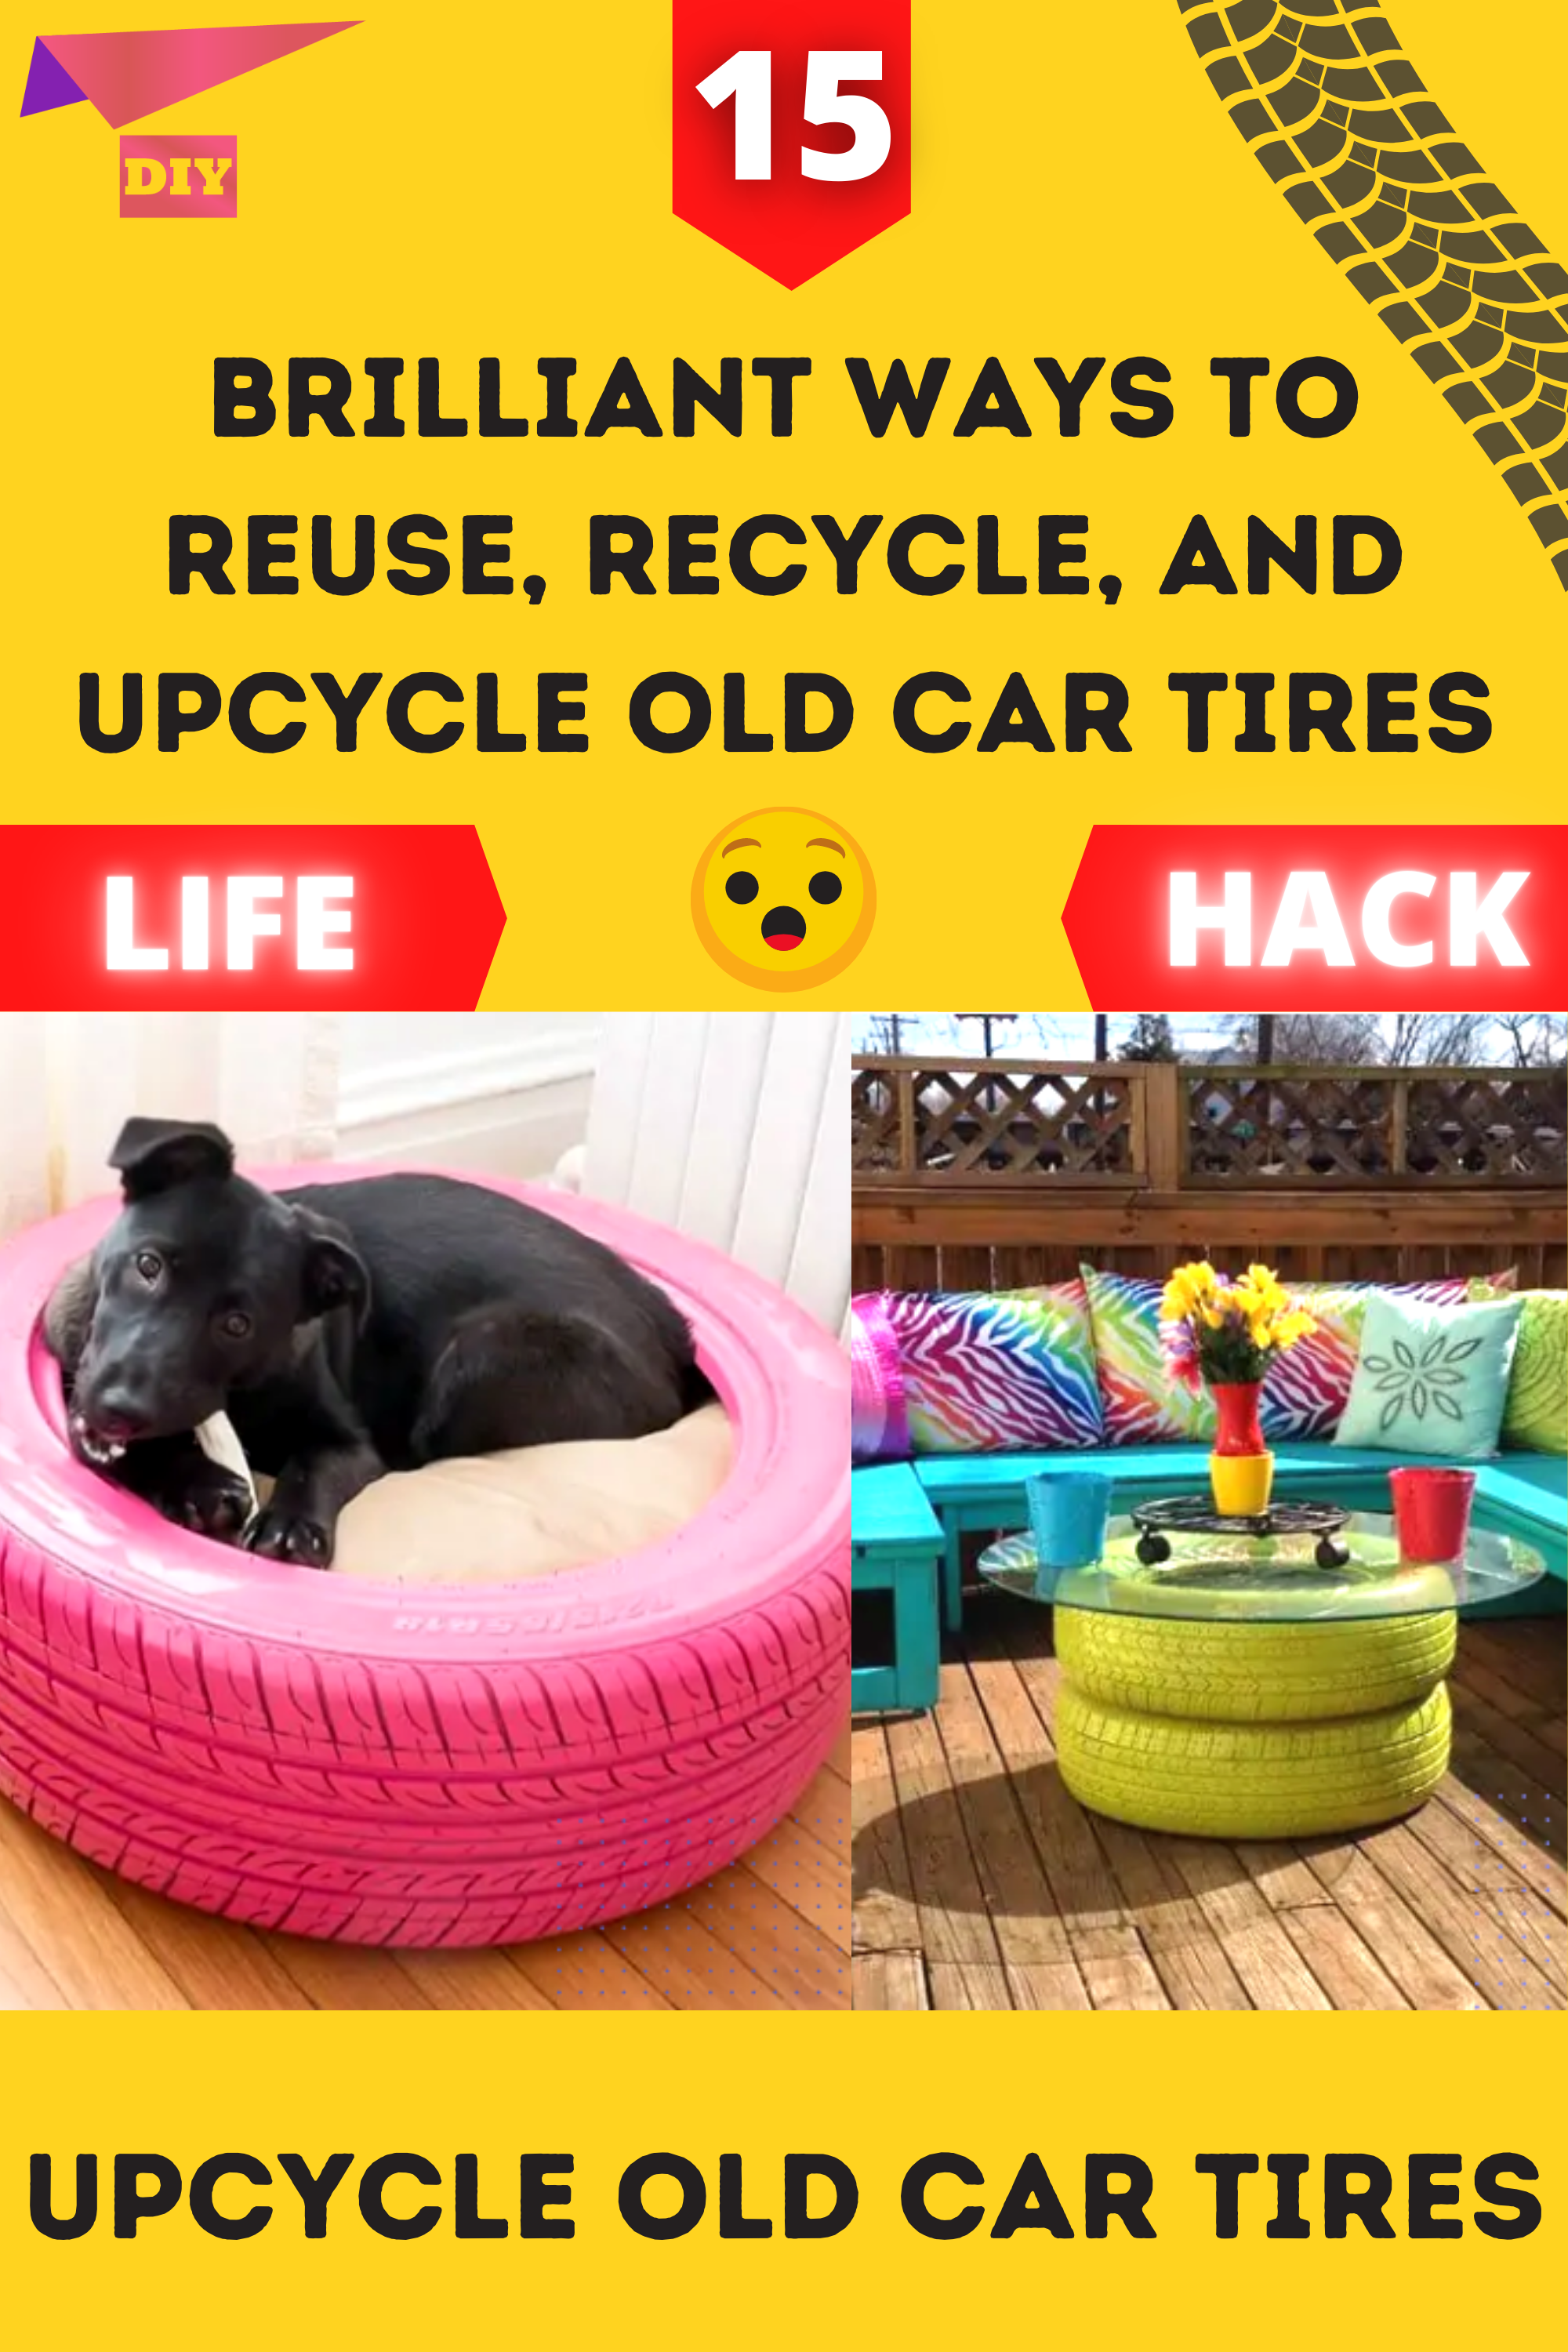 9 Brilliant Ways To Reuse, Recycle, And Upcycle Old Car Tires - 9 Brilliant Ways To Reuse, Recycle, And Upcycle Old Car Tires -   diy Ideas recycle